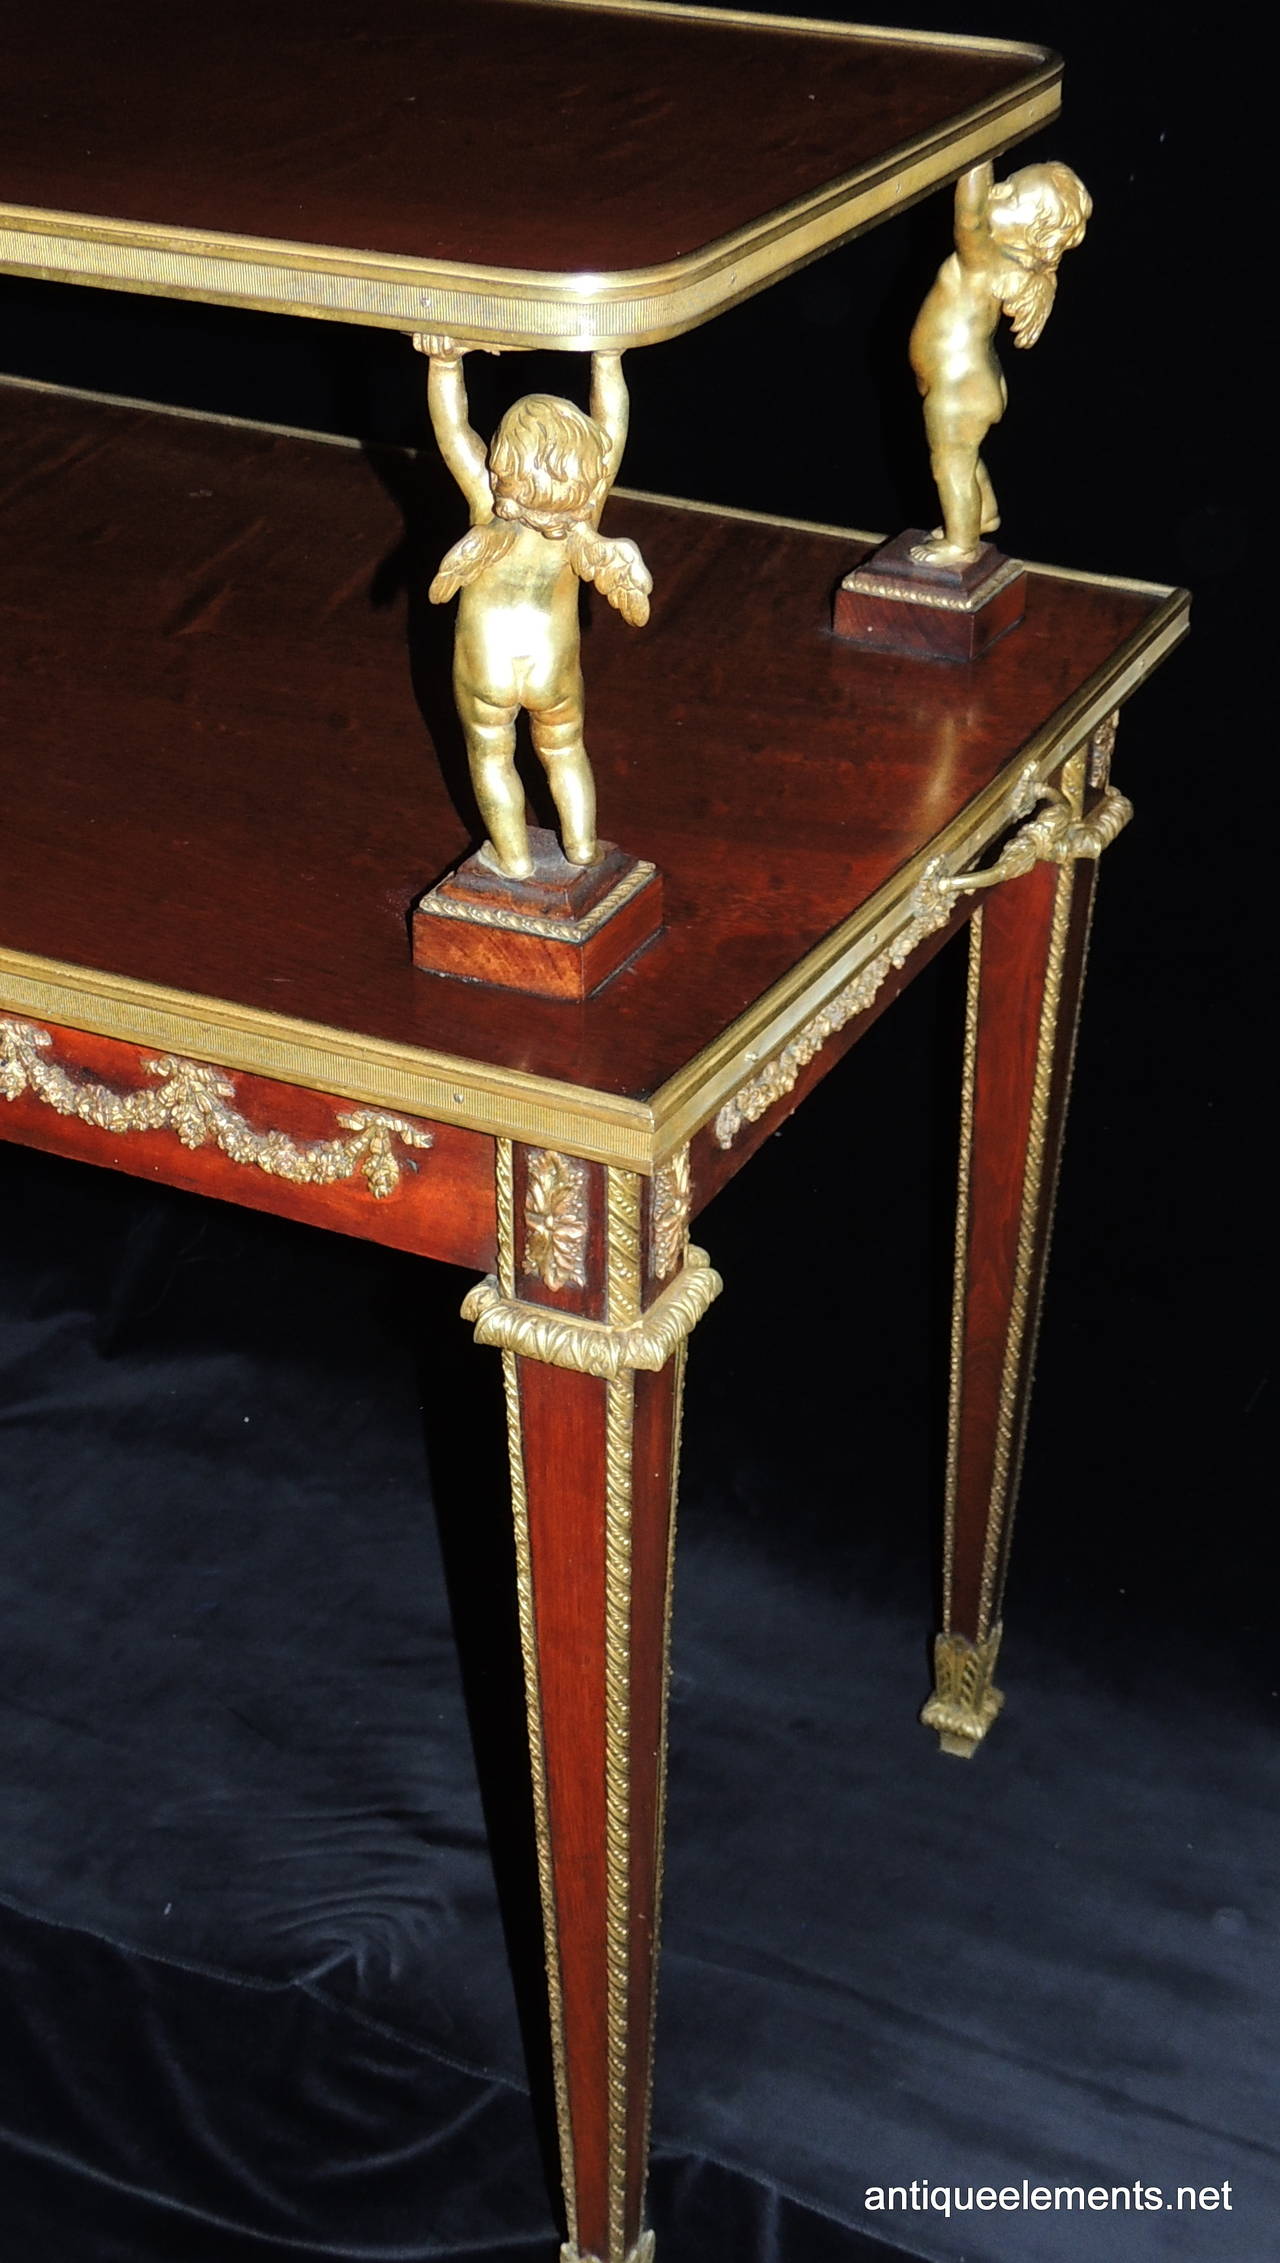 Exceptional Two Tier French Dore Bronze Ormolu Mounted Table Adorned W/ Cherub 2